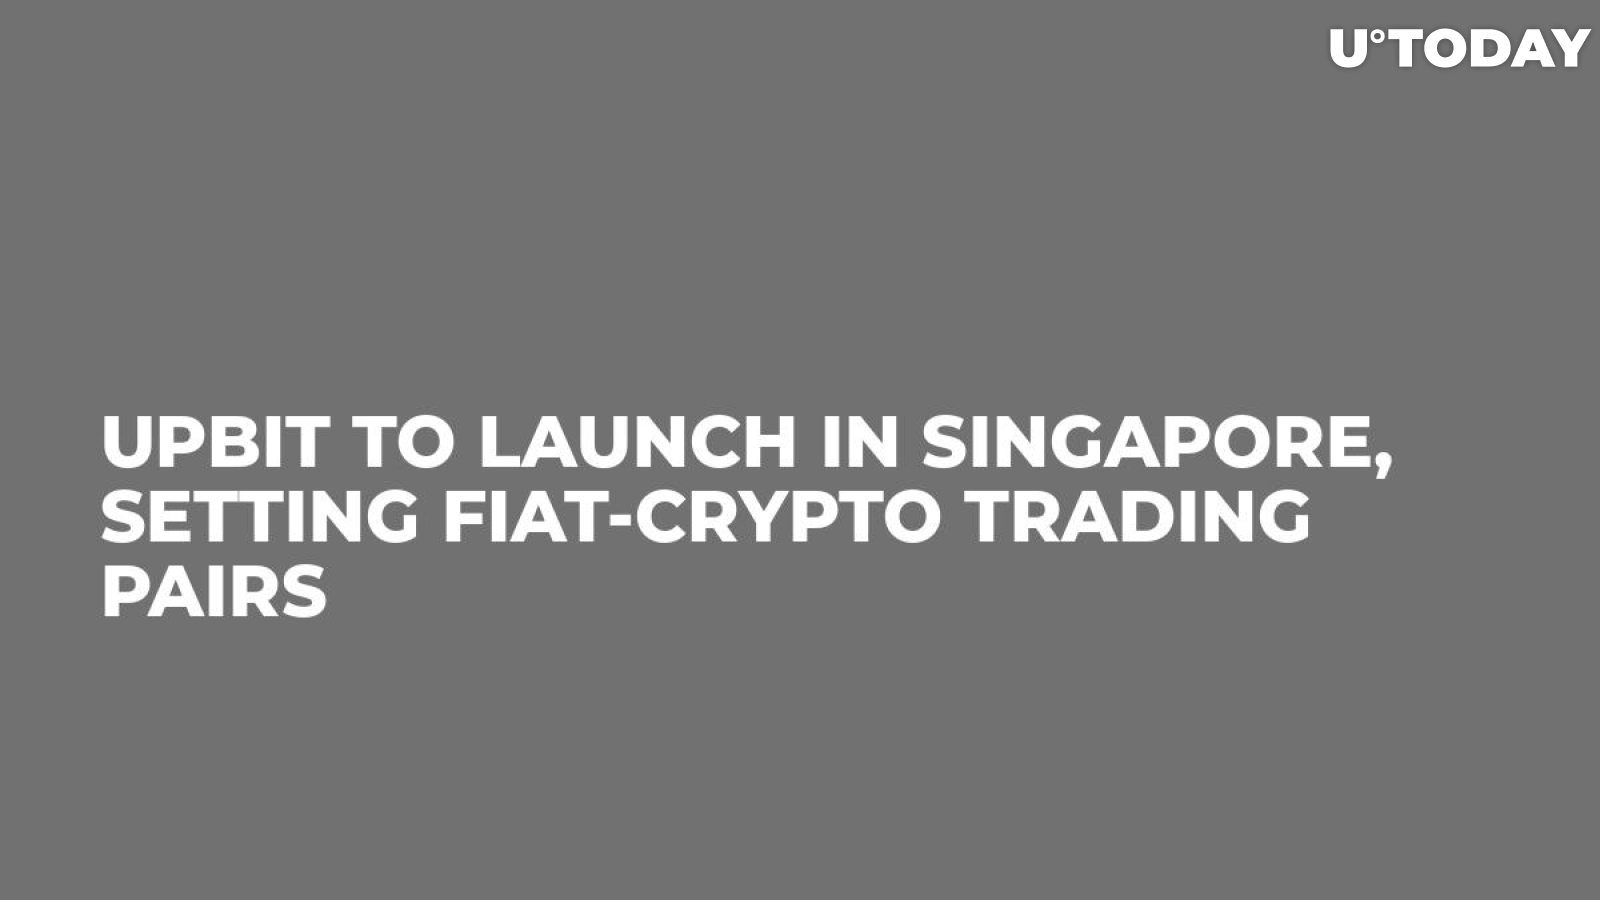 Upbit to Launch in Singapore, Setting Fiat-Crypto Trading Pairs